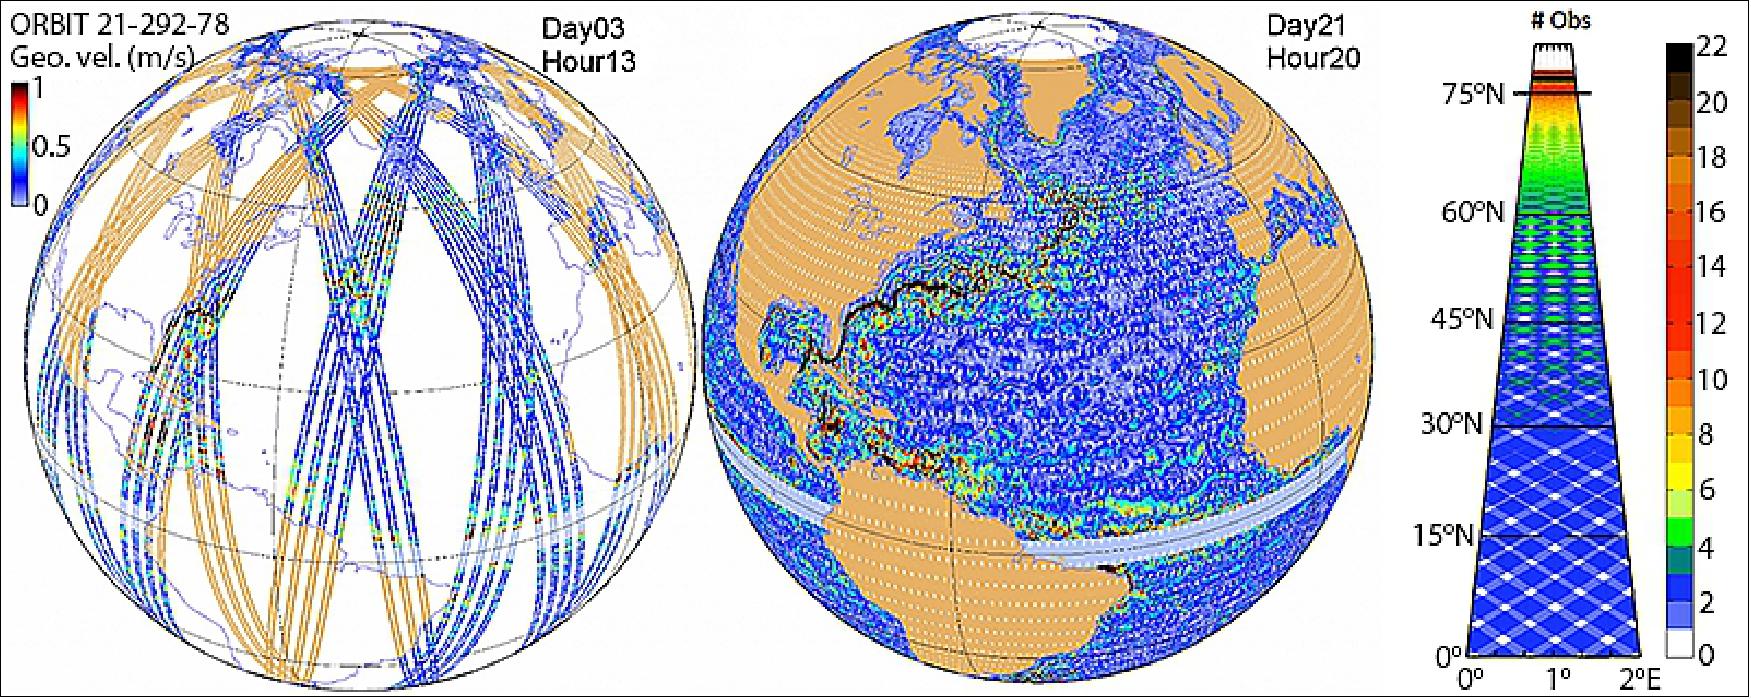 Figure 38: SWOT’s nominal orbit coverage up to 78ºN and 78ºS after (left) 3 days and (middle) the full 21 days of a complete cycle. Color shows the modeled surface currents for each track. Geo. vel. indicates surface geostrophic velocity (with the speed of currents in meters per second). (right) The number of observations at a given latitude (shown here for northern latitudes, but the same applies to the south) during the 21-day repeat period [image credit: (left and middle) C. Ubelmann, CLS; (right) JPL/NASA]